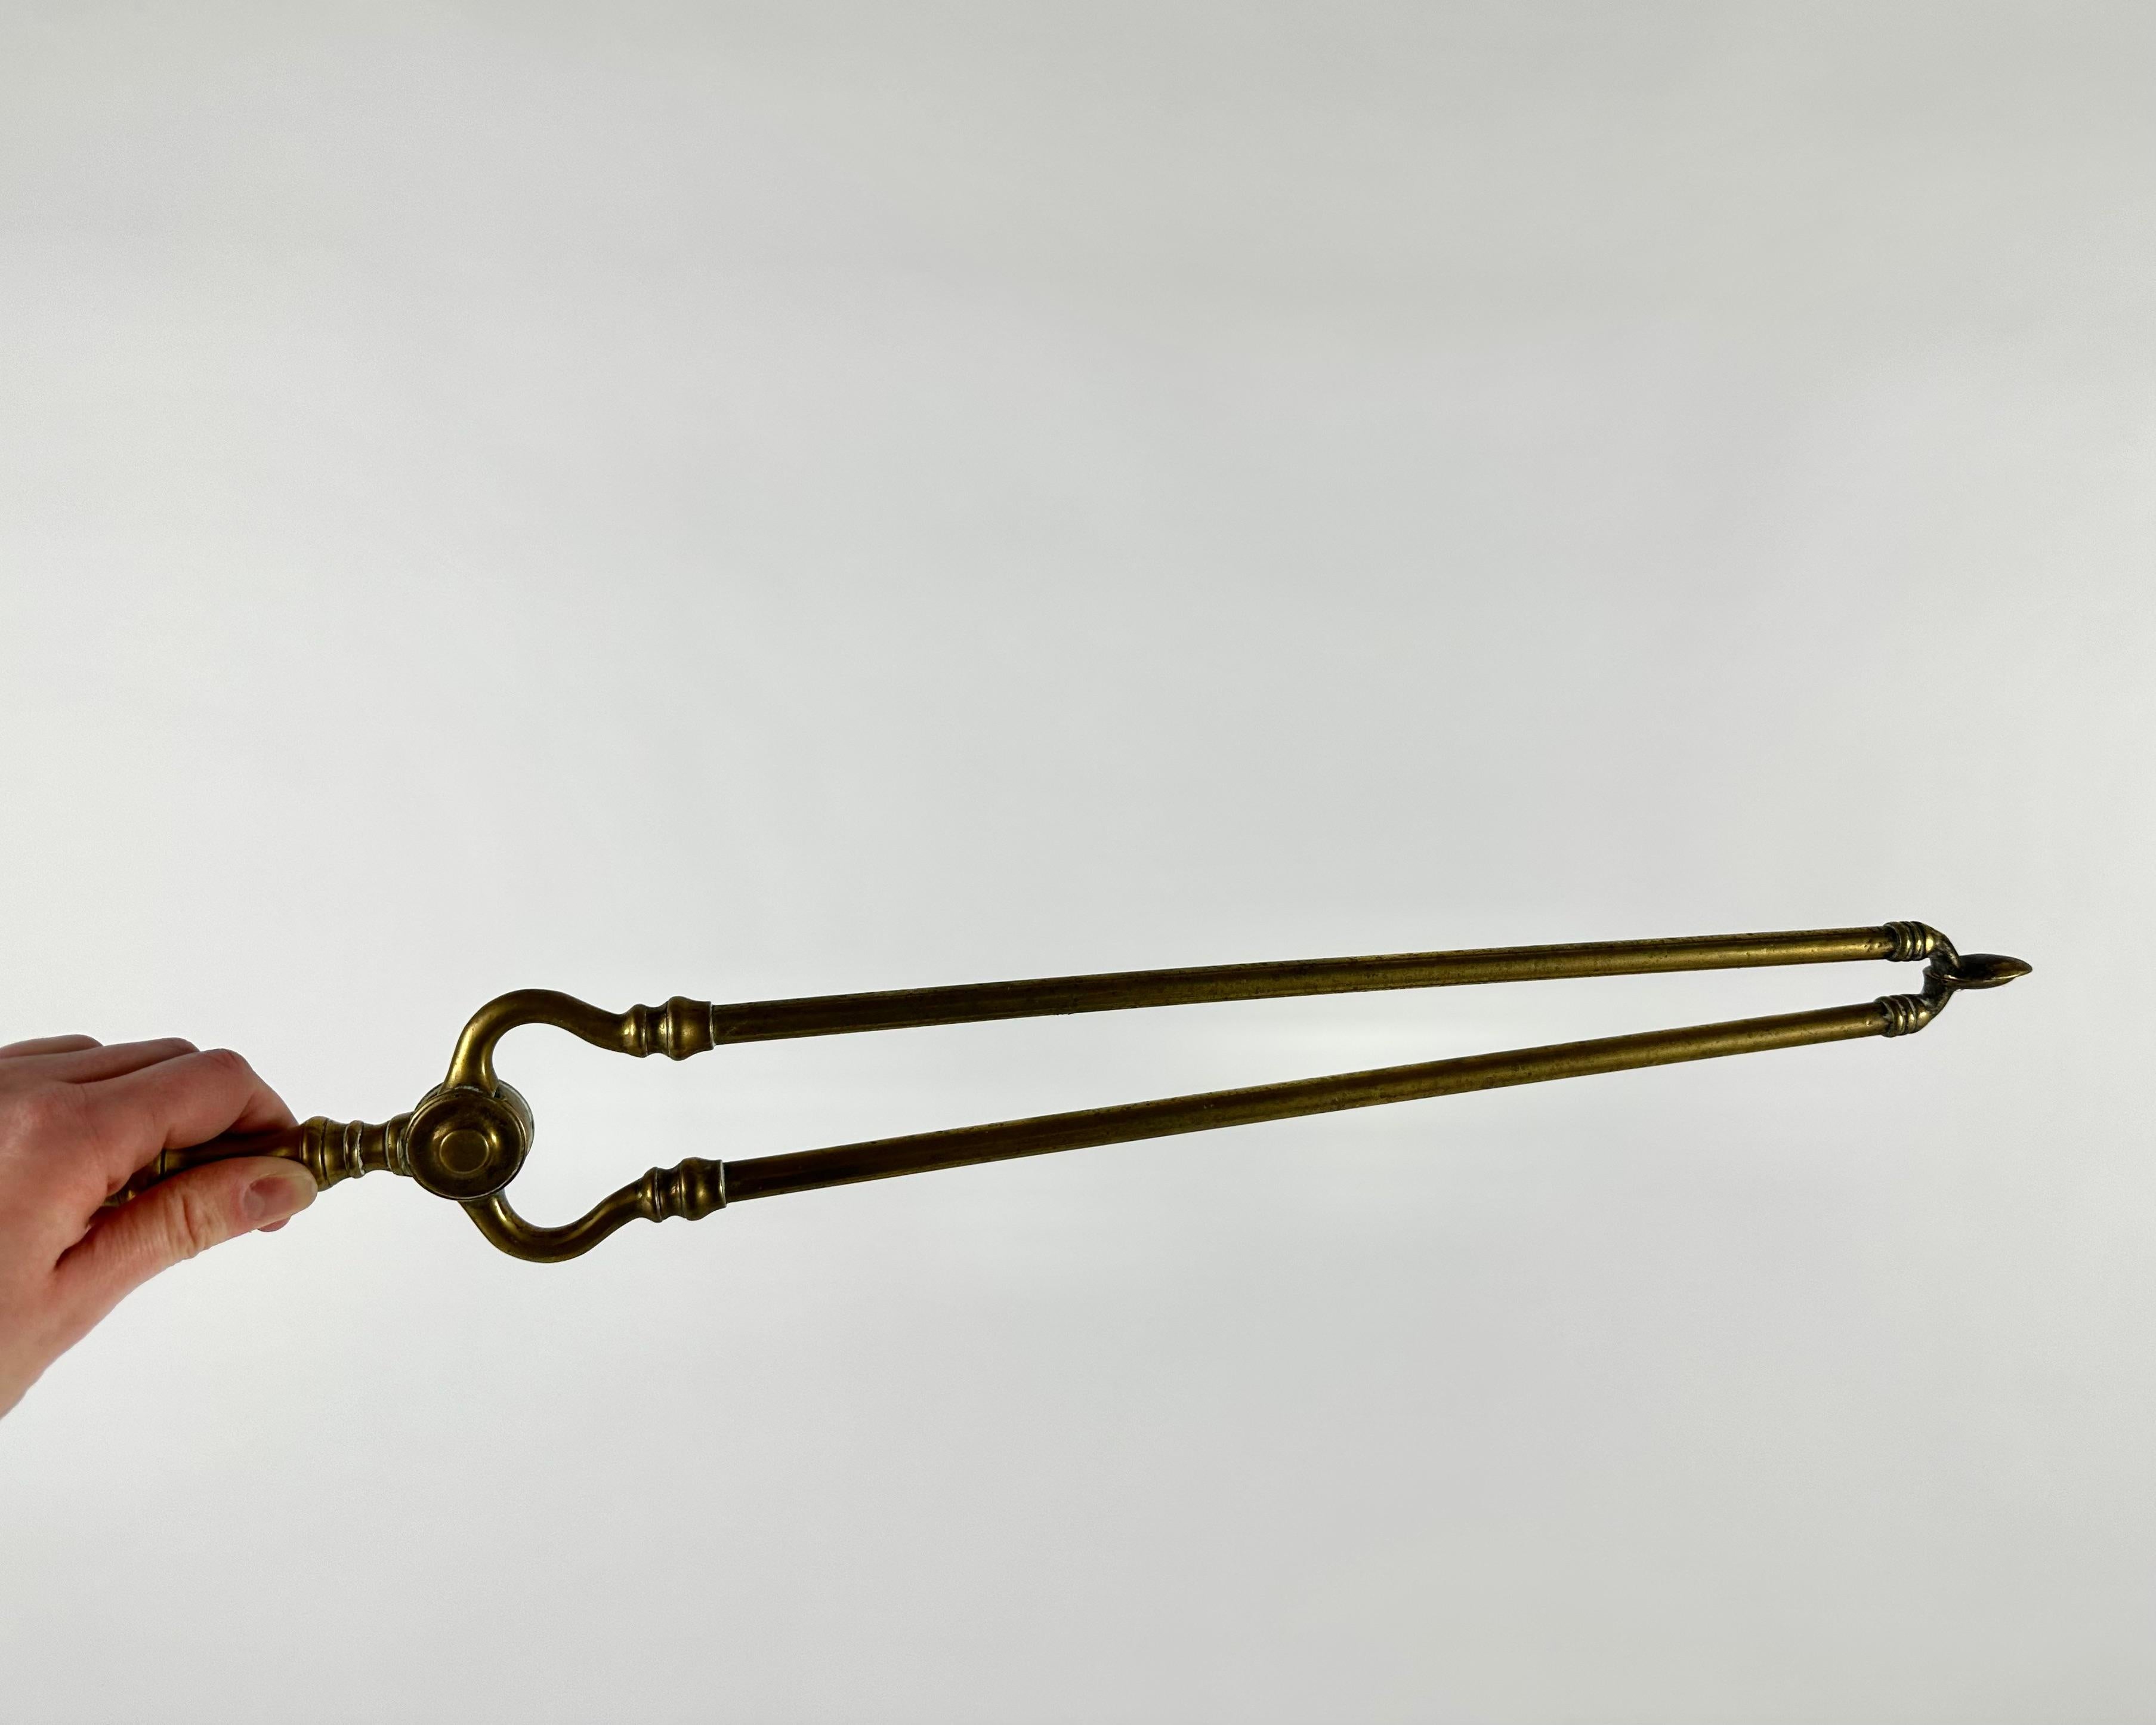 French Vintage Fireplace Tools Bronze Set Of 4-Piece Bronze Accessories, France, 1950s For Sale